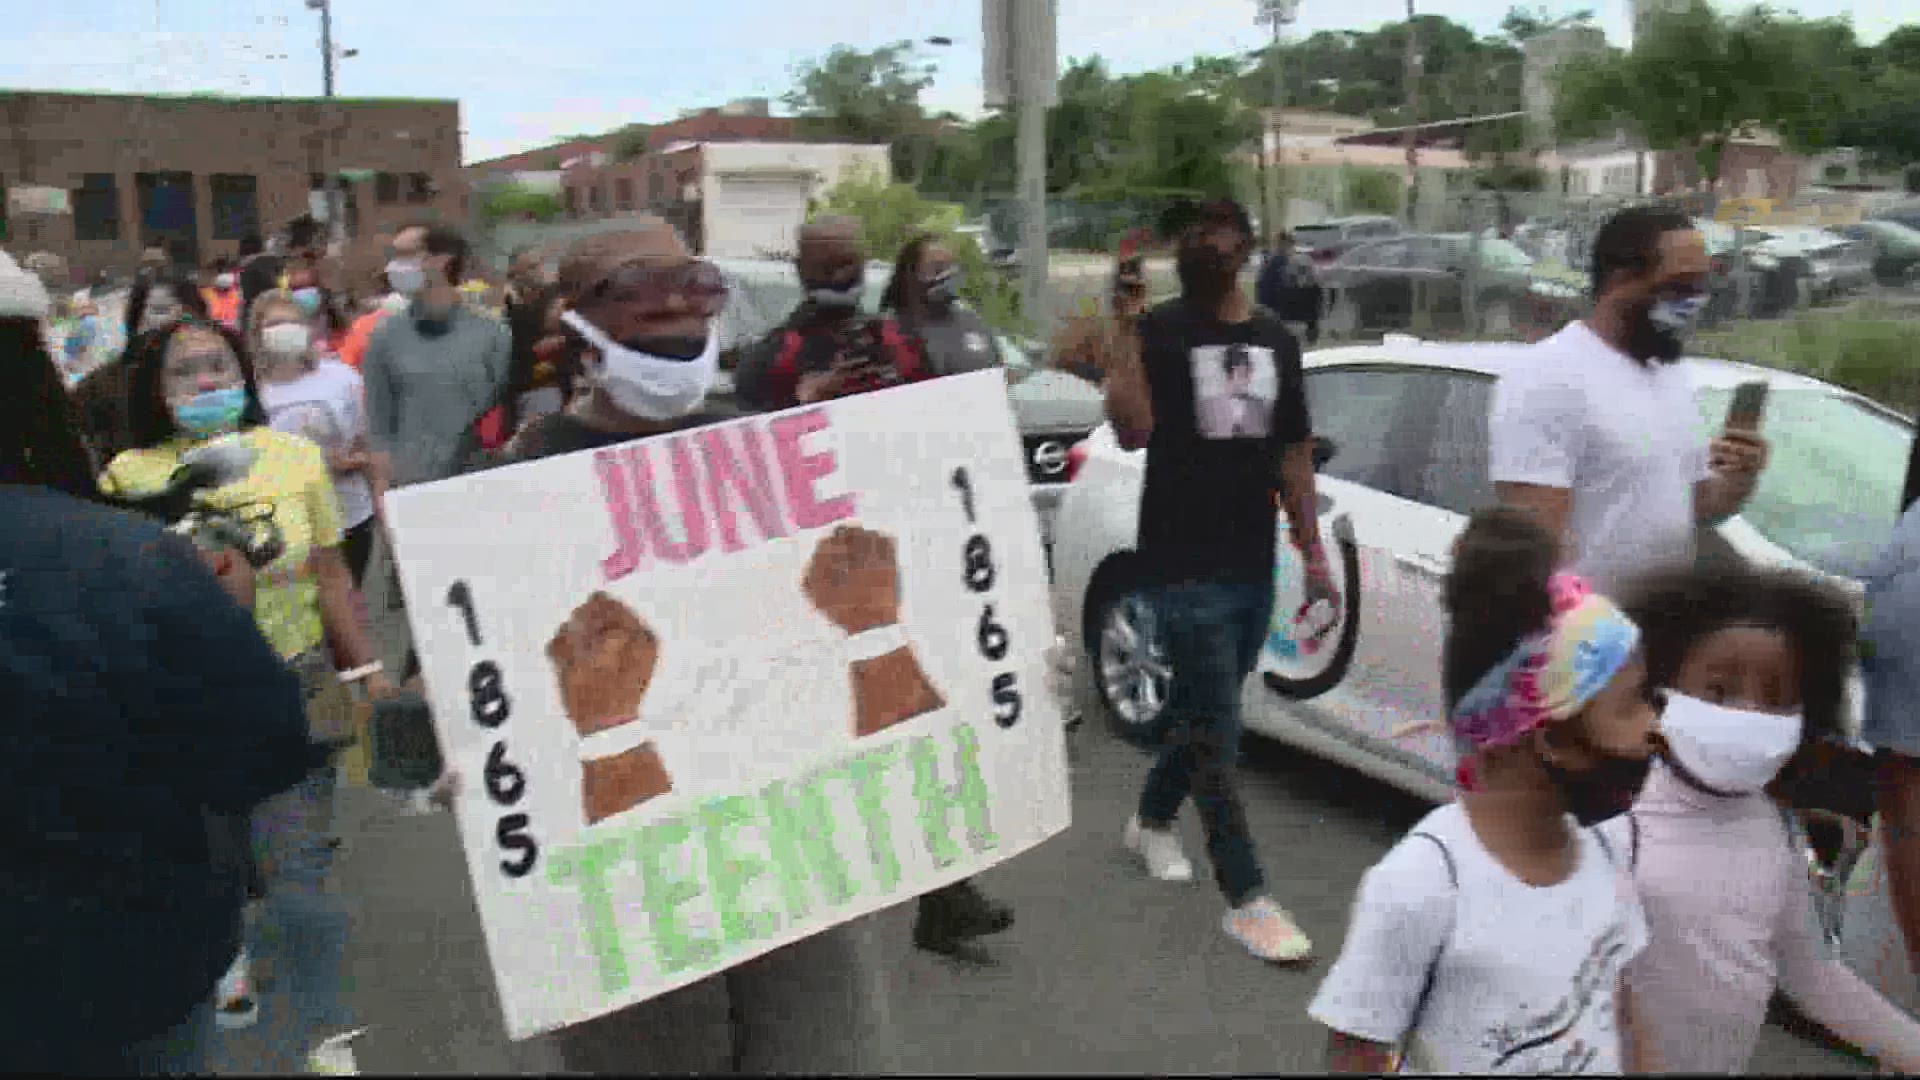 Ahead of gatherings in honor of Juneteenth, a racial justice group held a webinar to organize protesters and share guidance on how to be a part of the events.